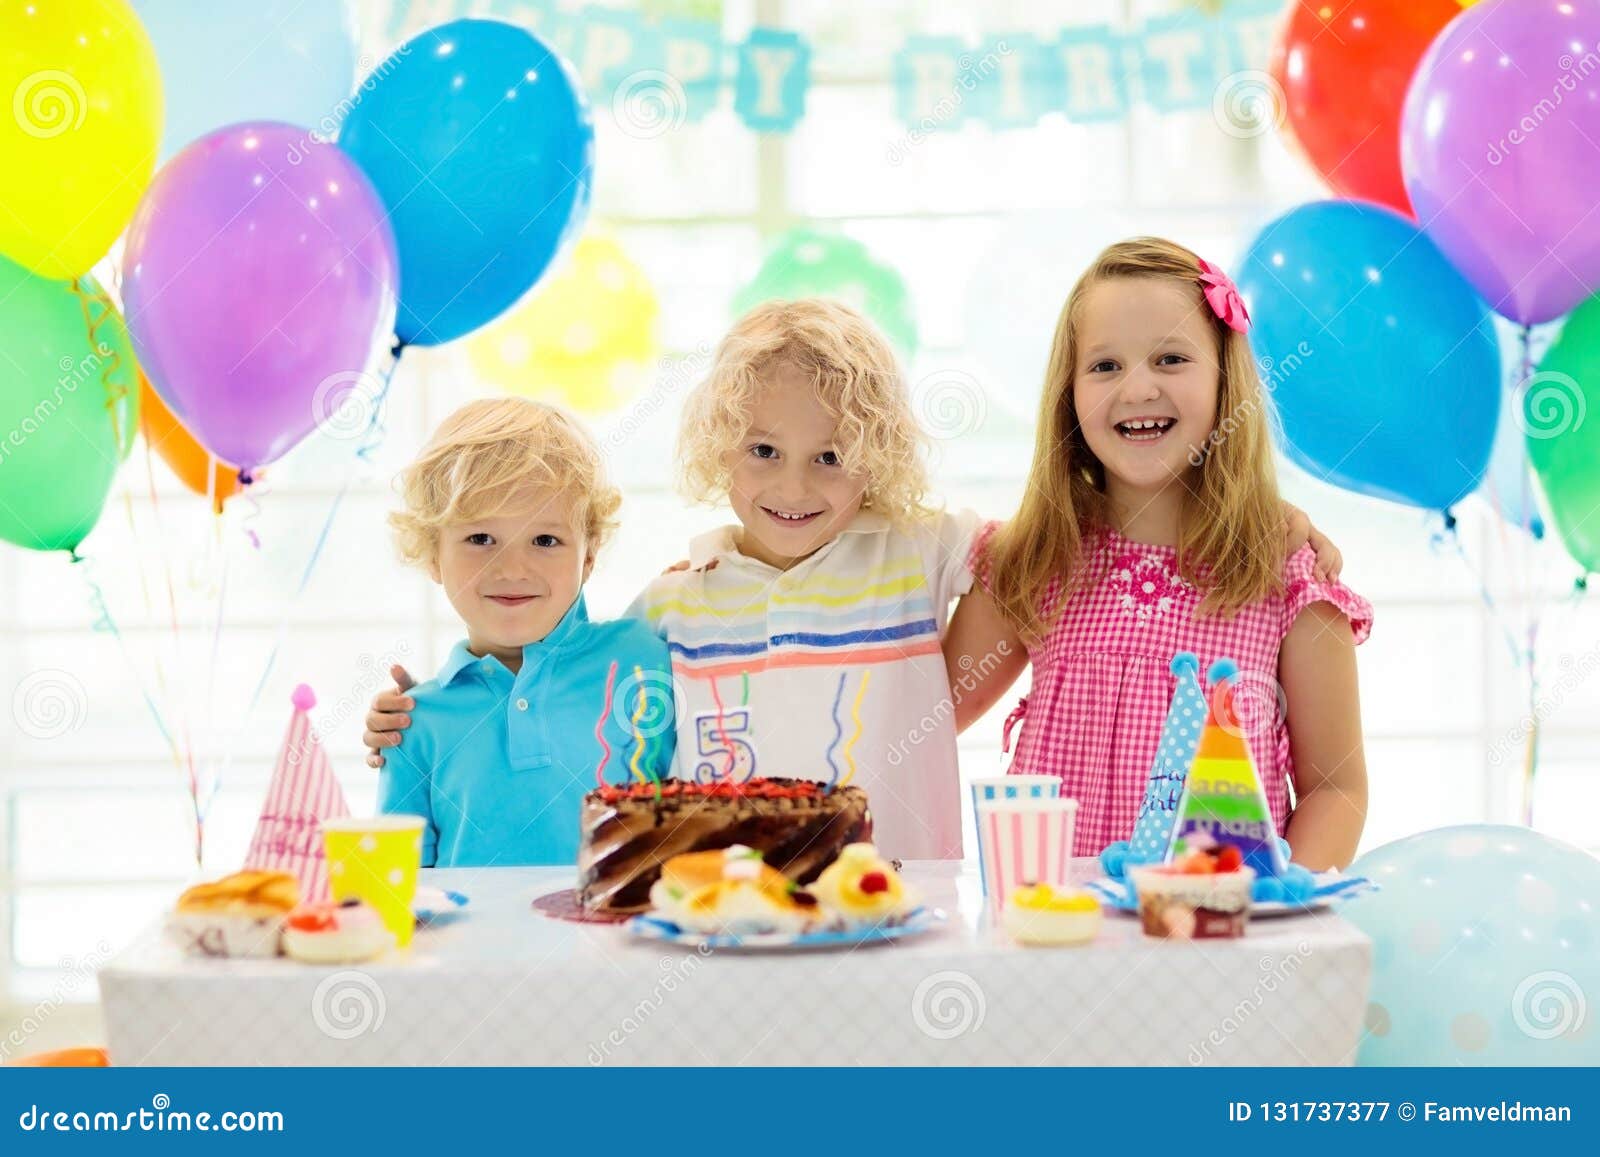 Kids Birthday Party. Child Blowing Out Candles on Colorful Cake. Decorated  Home with Rainbow Flag Banners, Balloons Stock Image - Image of curly,  group: 131737377